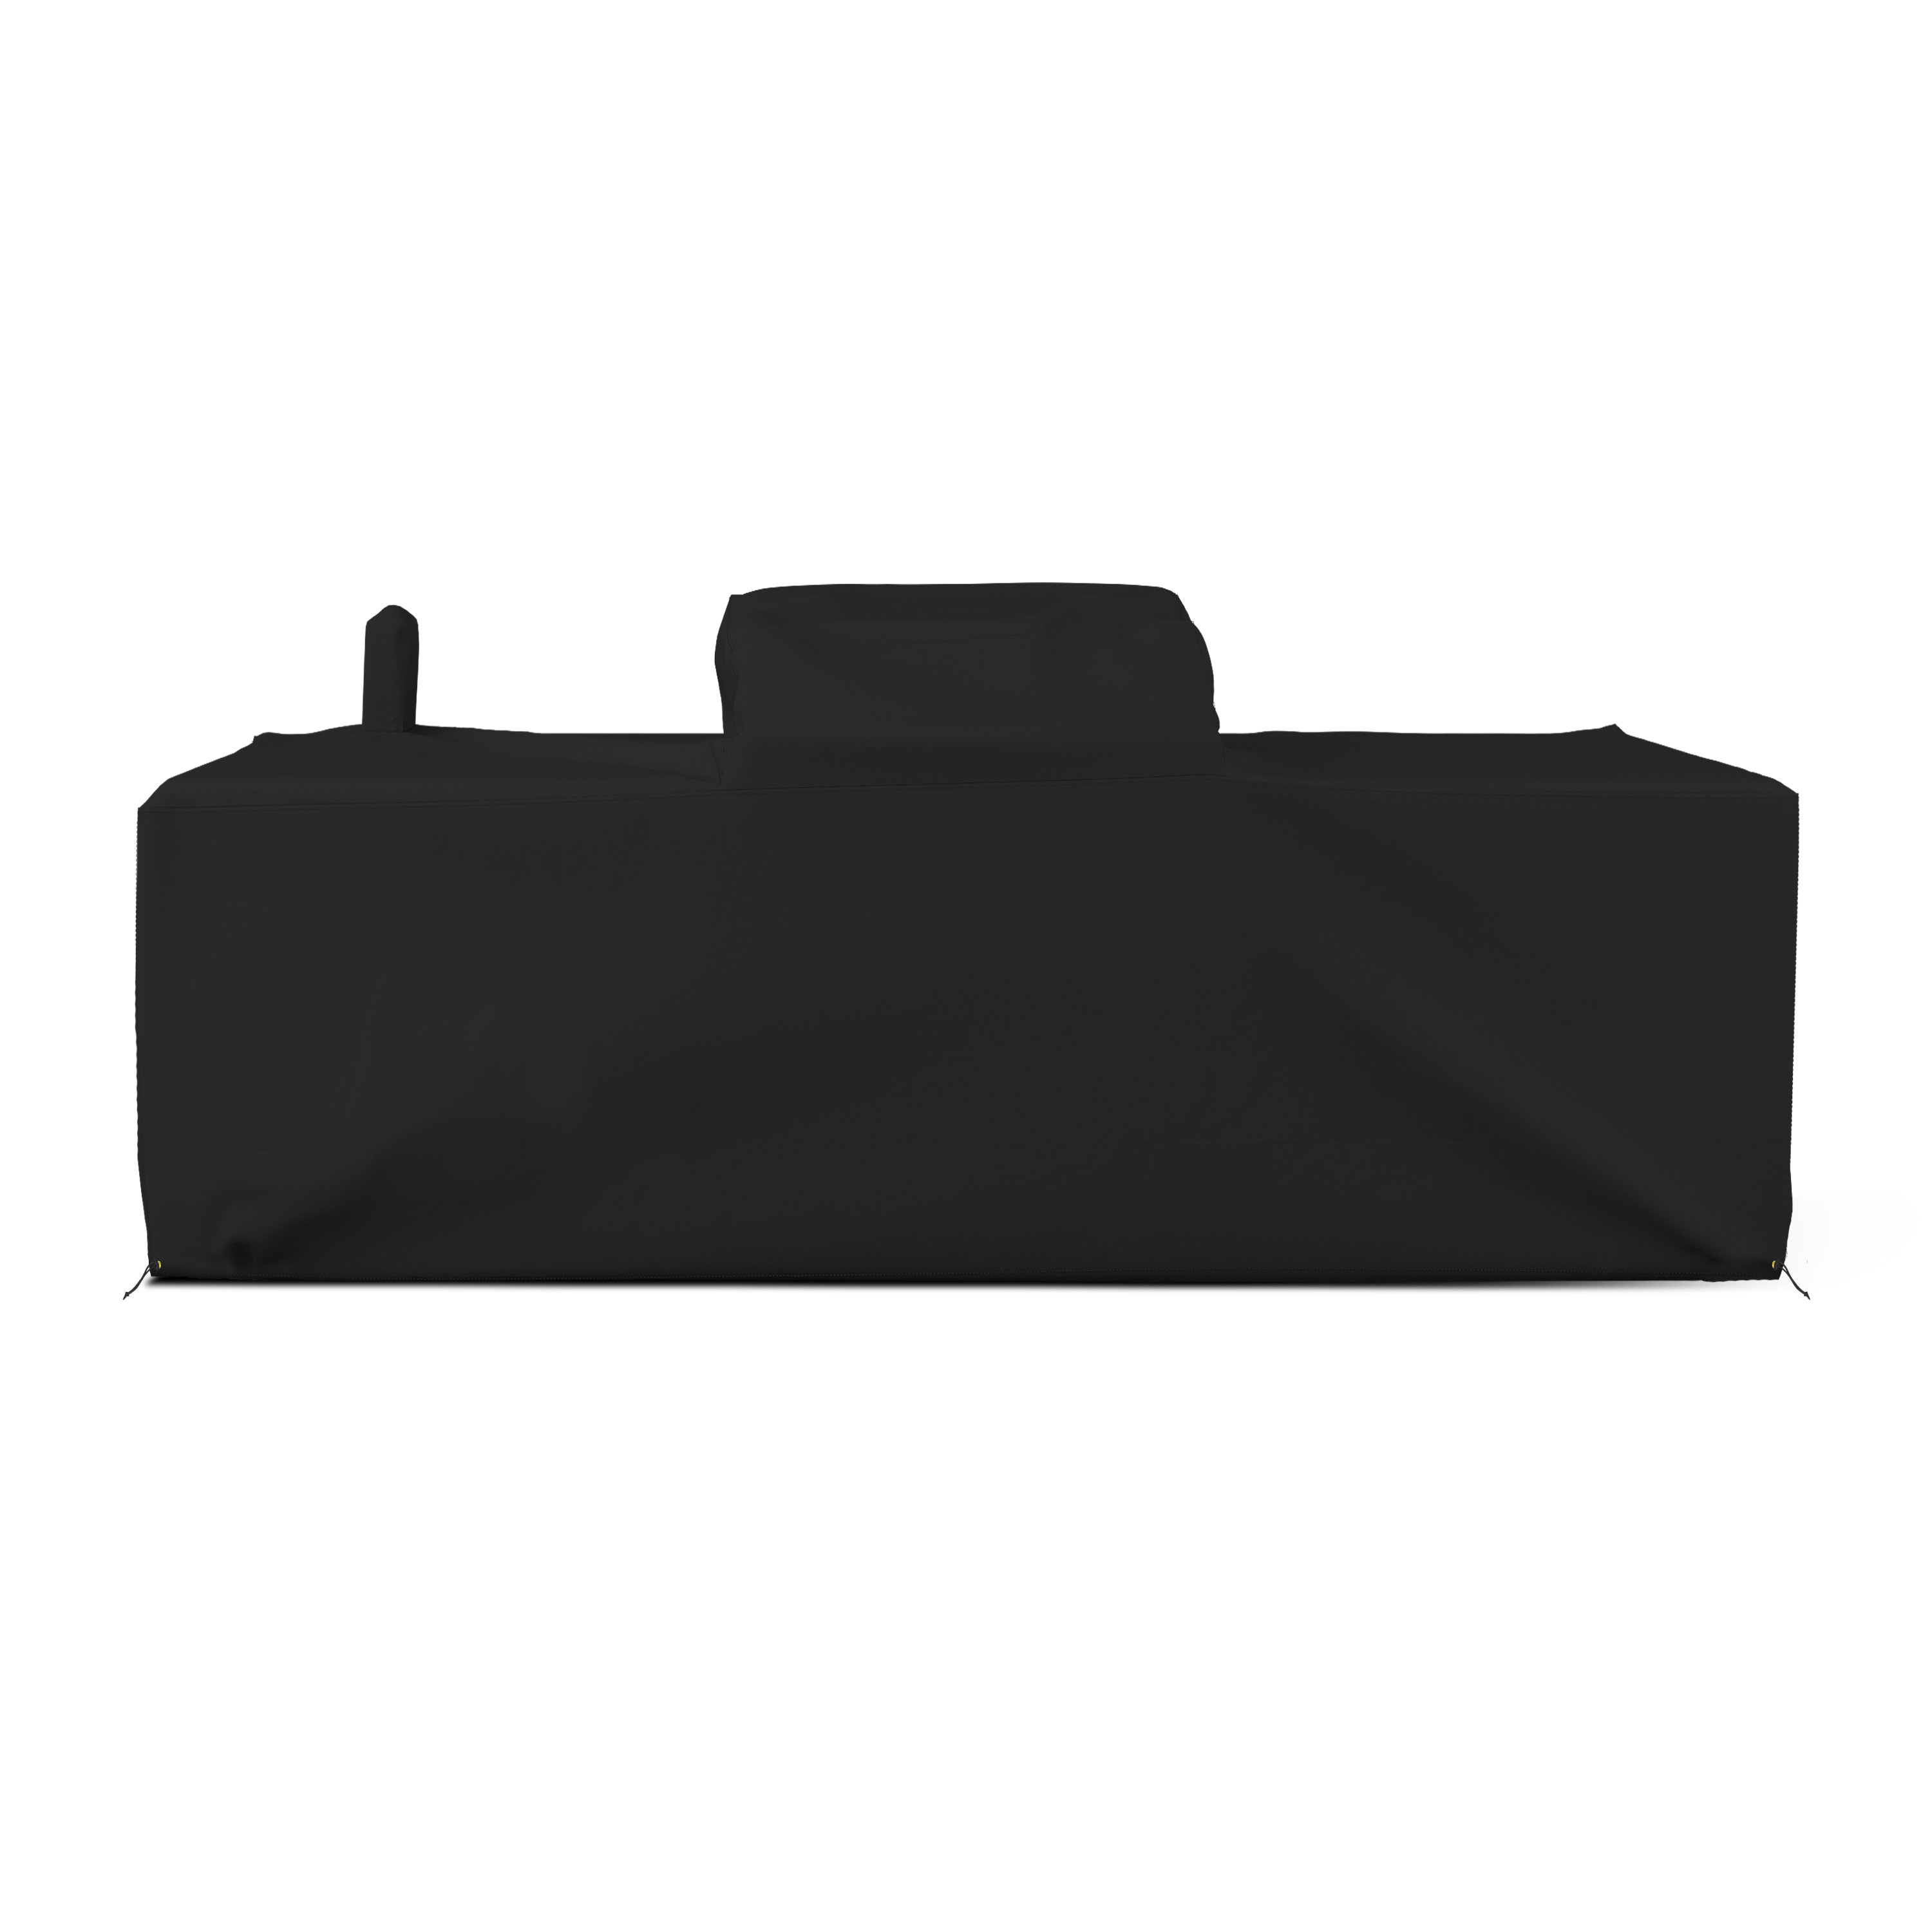 Heavyduty Waterproof Straight Island Kitchen Coveroutdoor Weather Resistant Sectional Kitchen Cover 